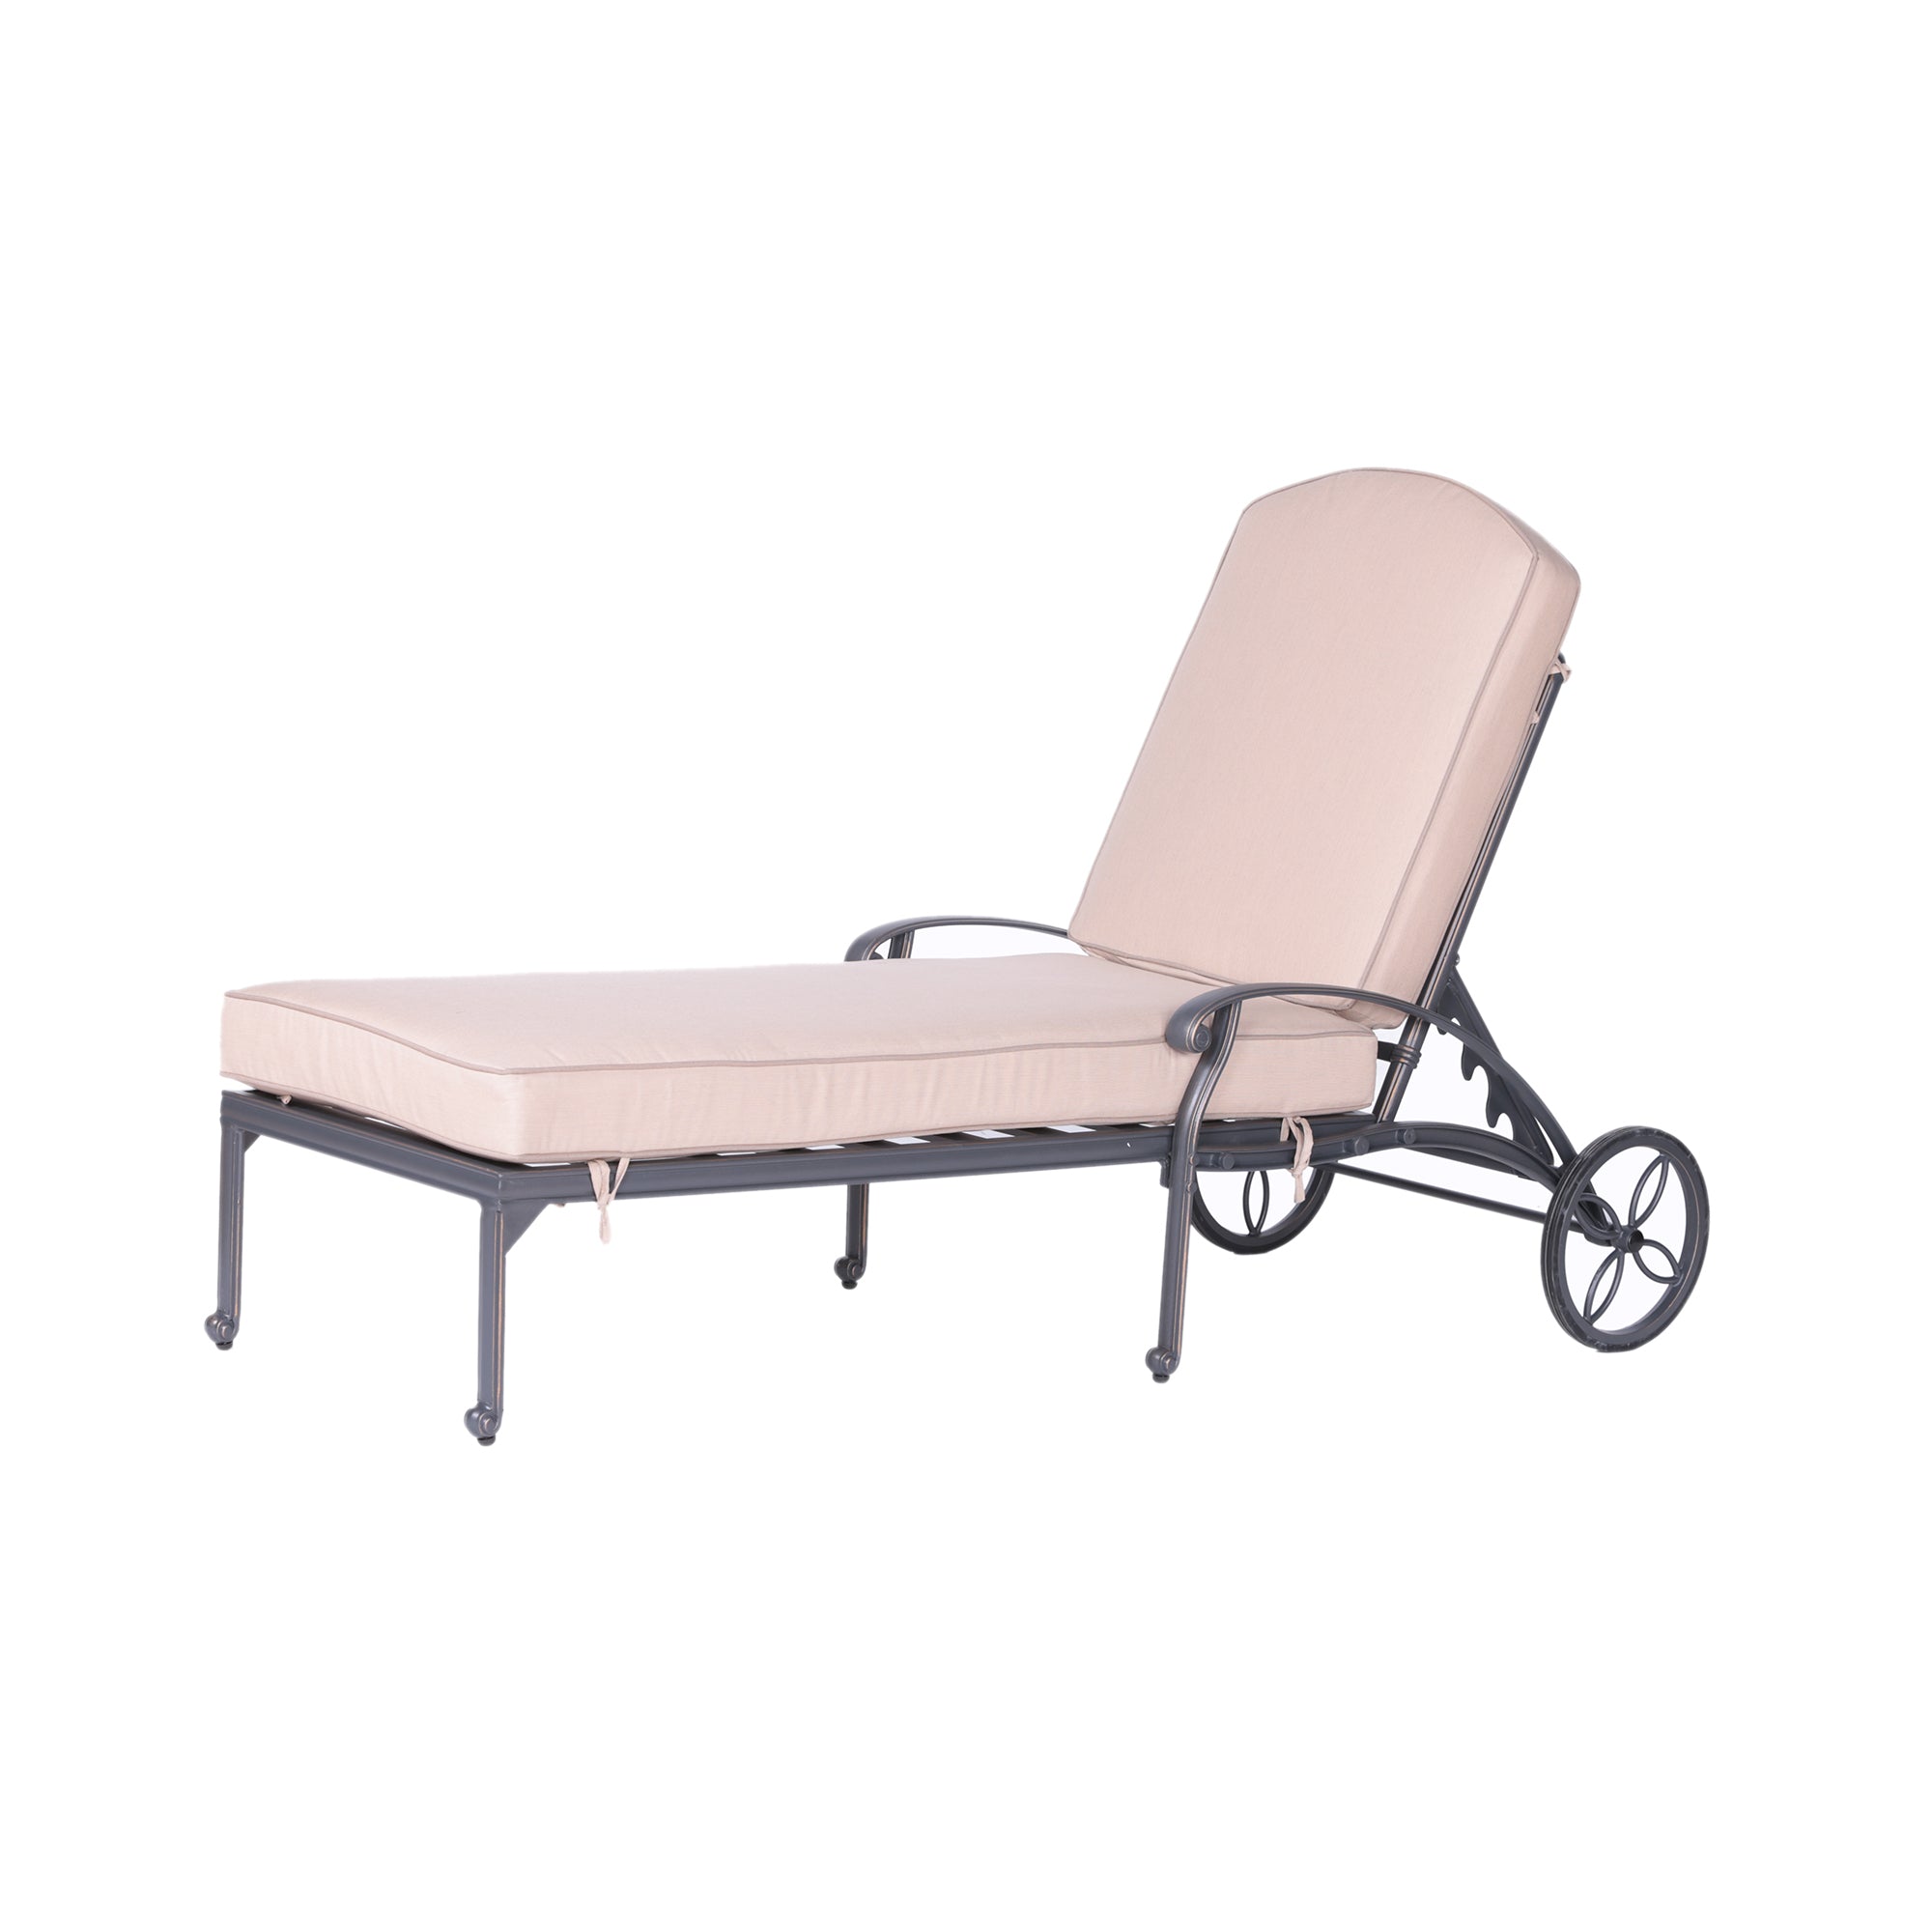 87" Long Reclining Chaise Lounge Set with Sunbrella Cushion and Table